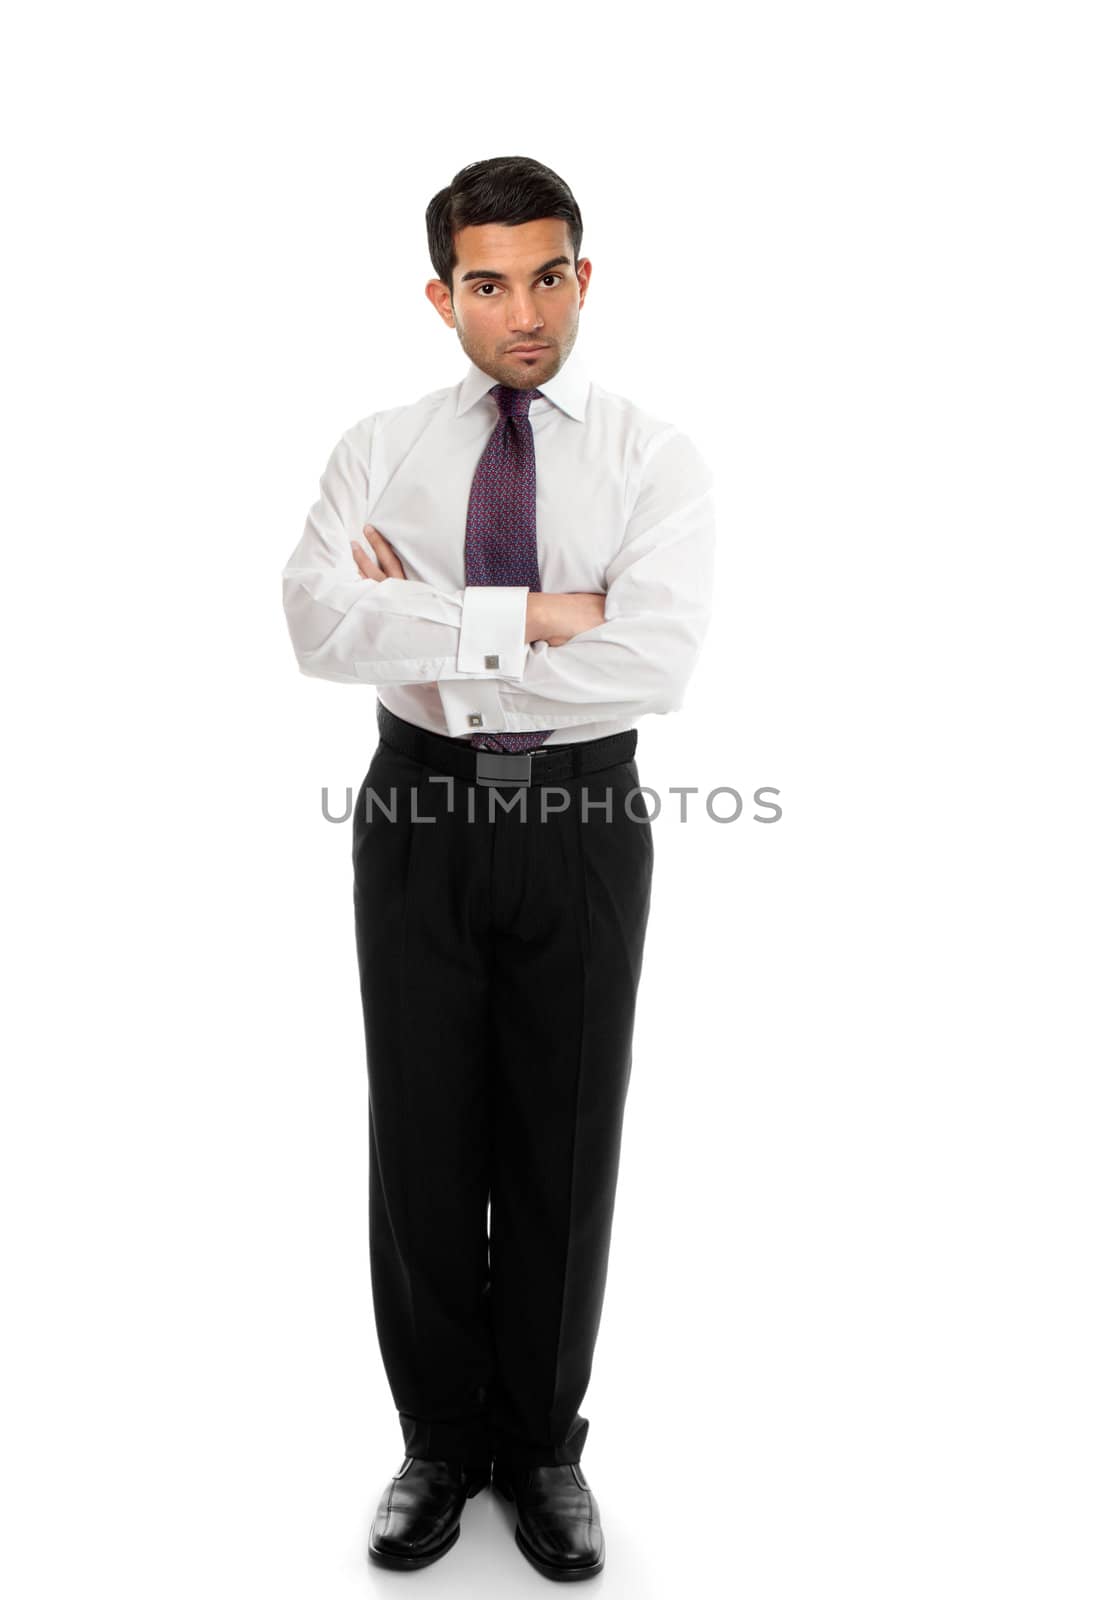 Confident business man or salesman standing with arms folded on a white background.